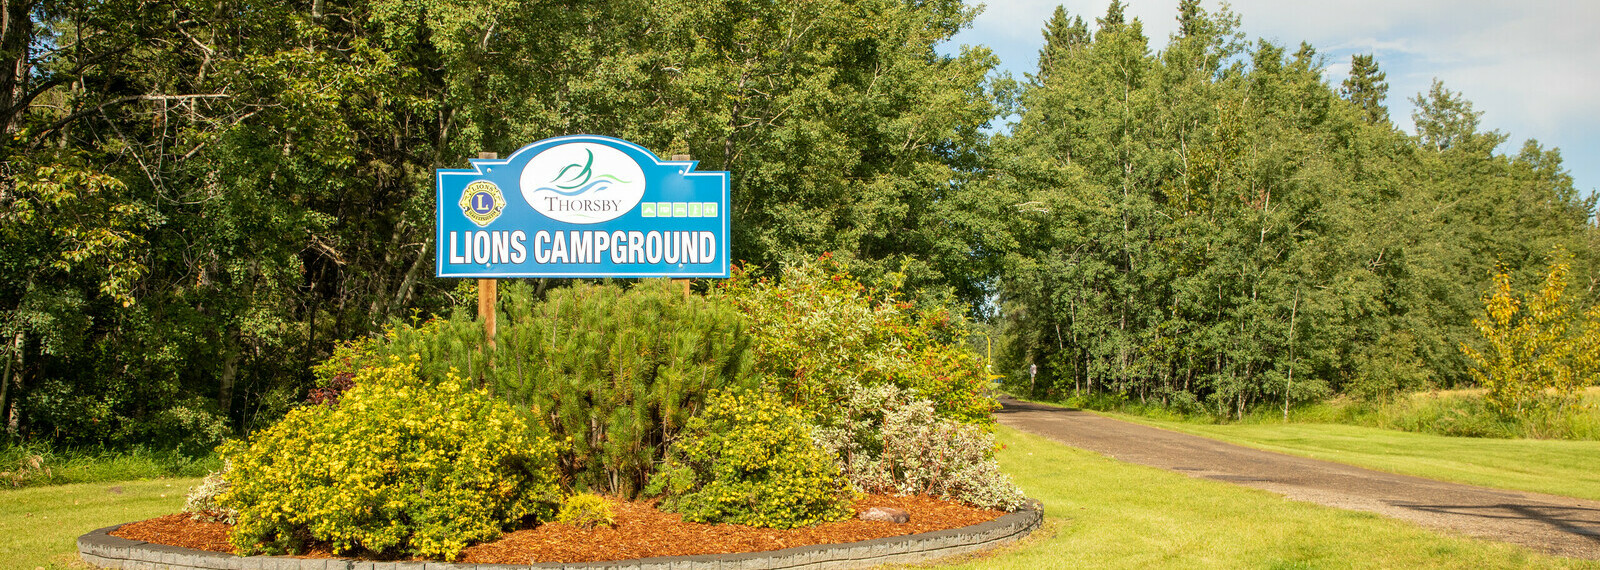 Lions Campground